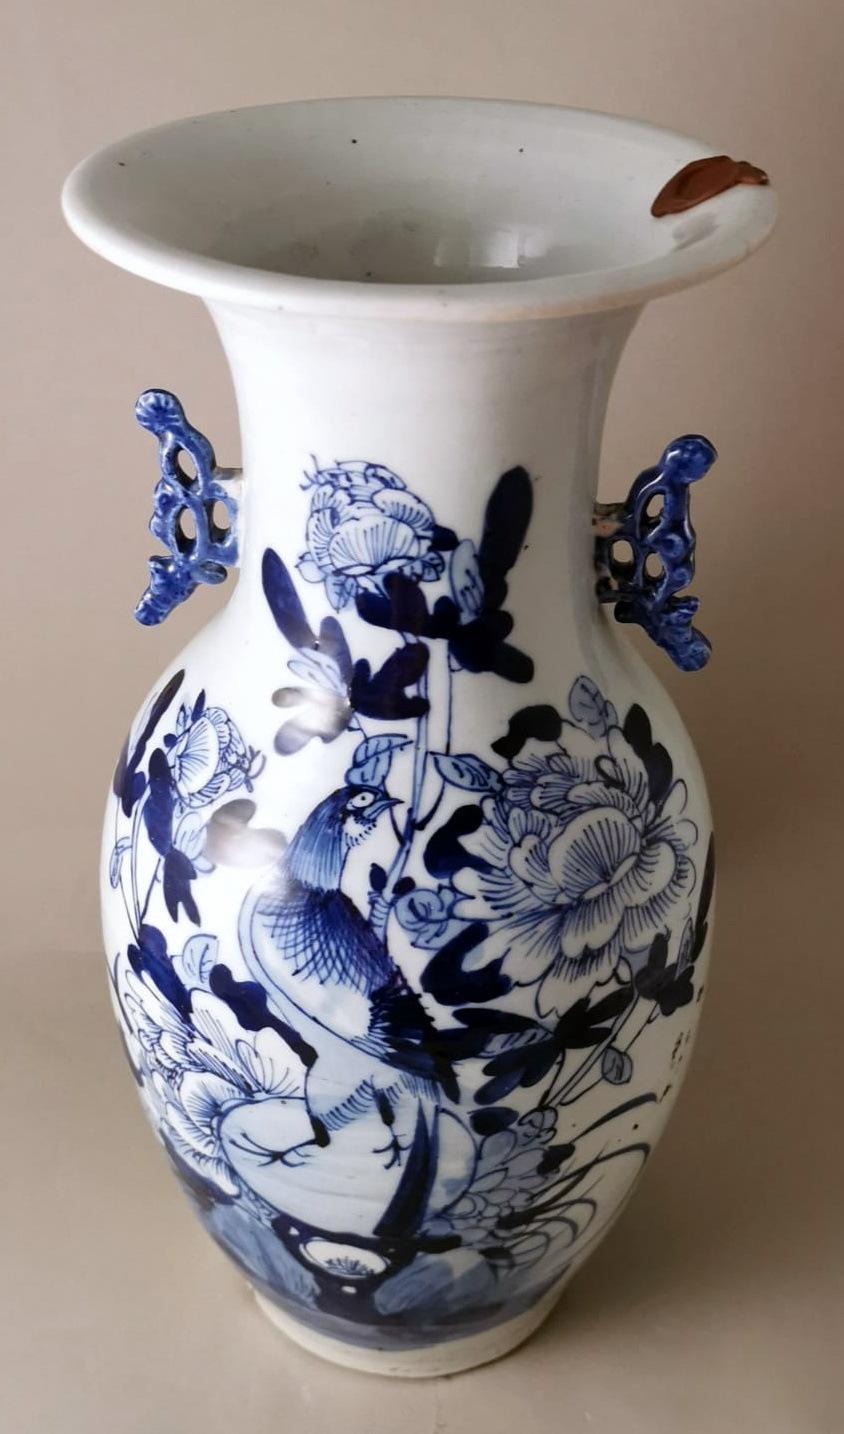 Chinese Porcelain Baluster Vase With Cobalt Blue Floral Decoration In Good Condition For Sale In Prato, Tuscany